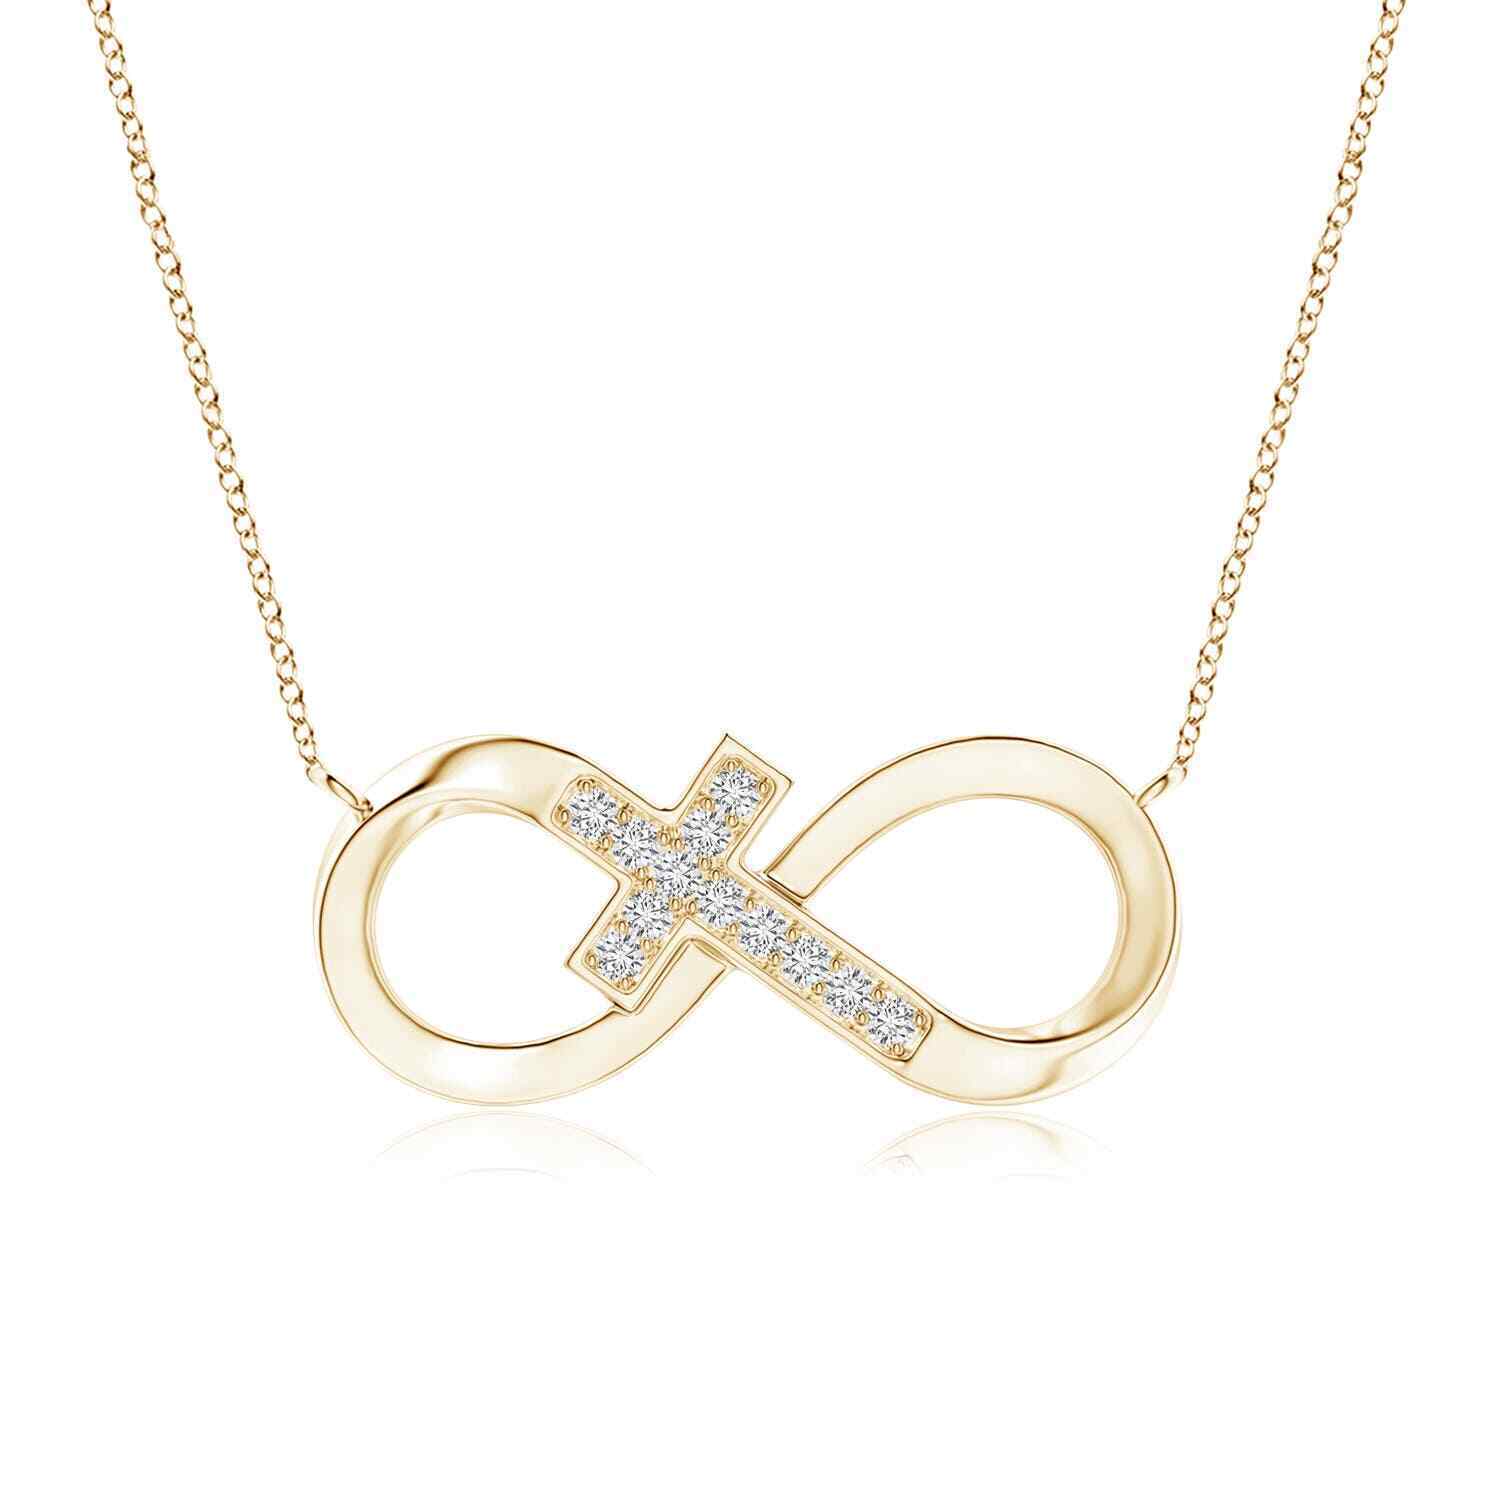 Primary image for ANGARA Diamond Sideways Cross Pendant Necklace in 14K Gold (HSI2, 0.1 Ctw)